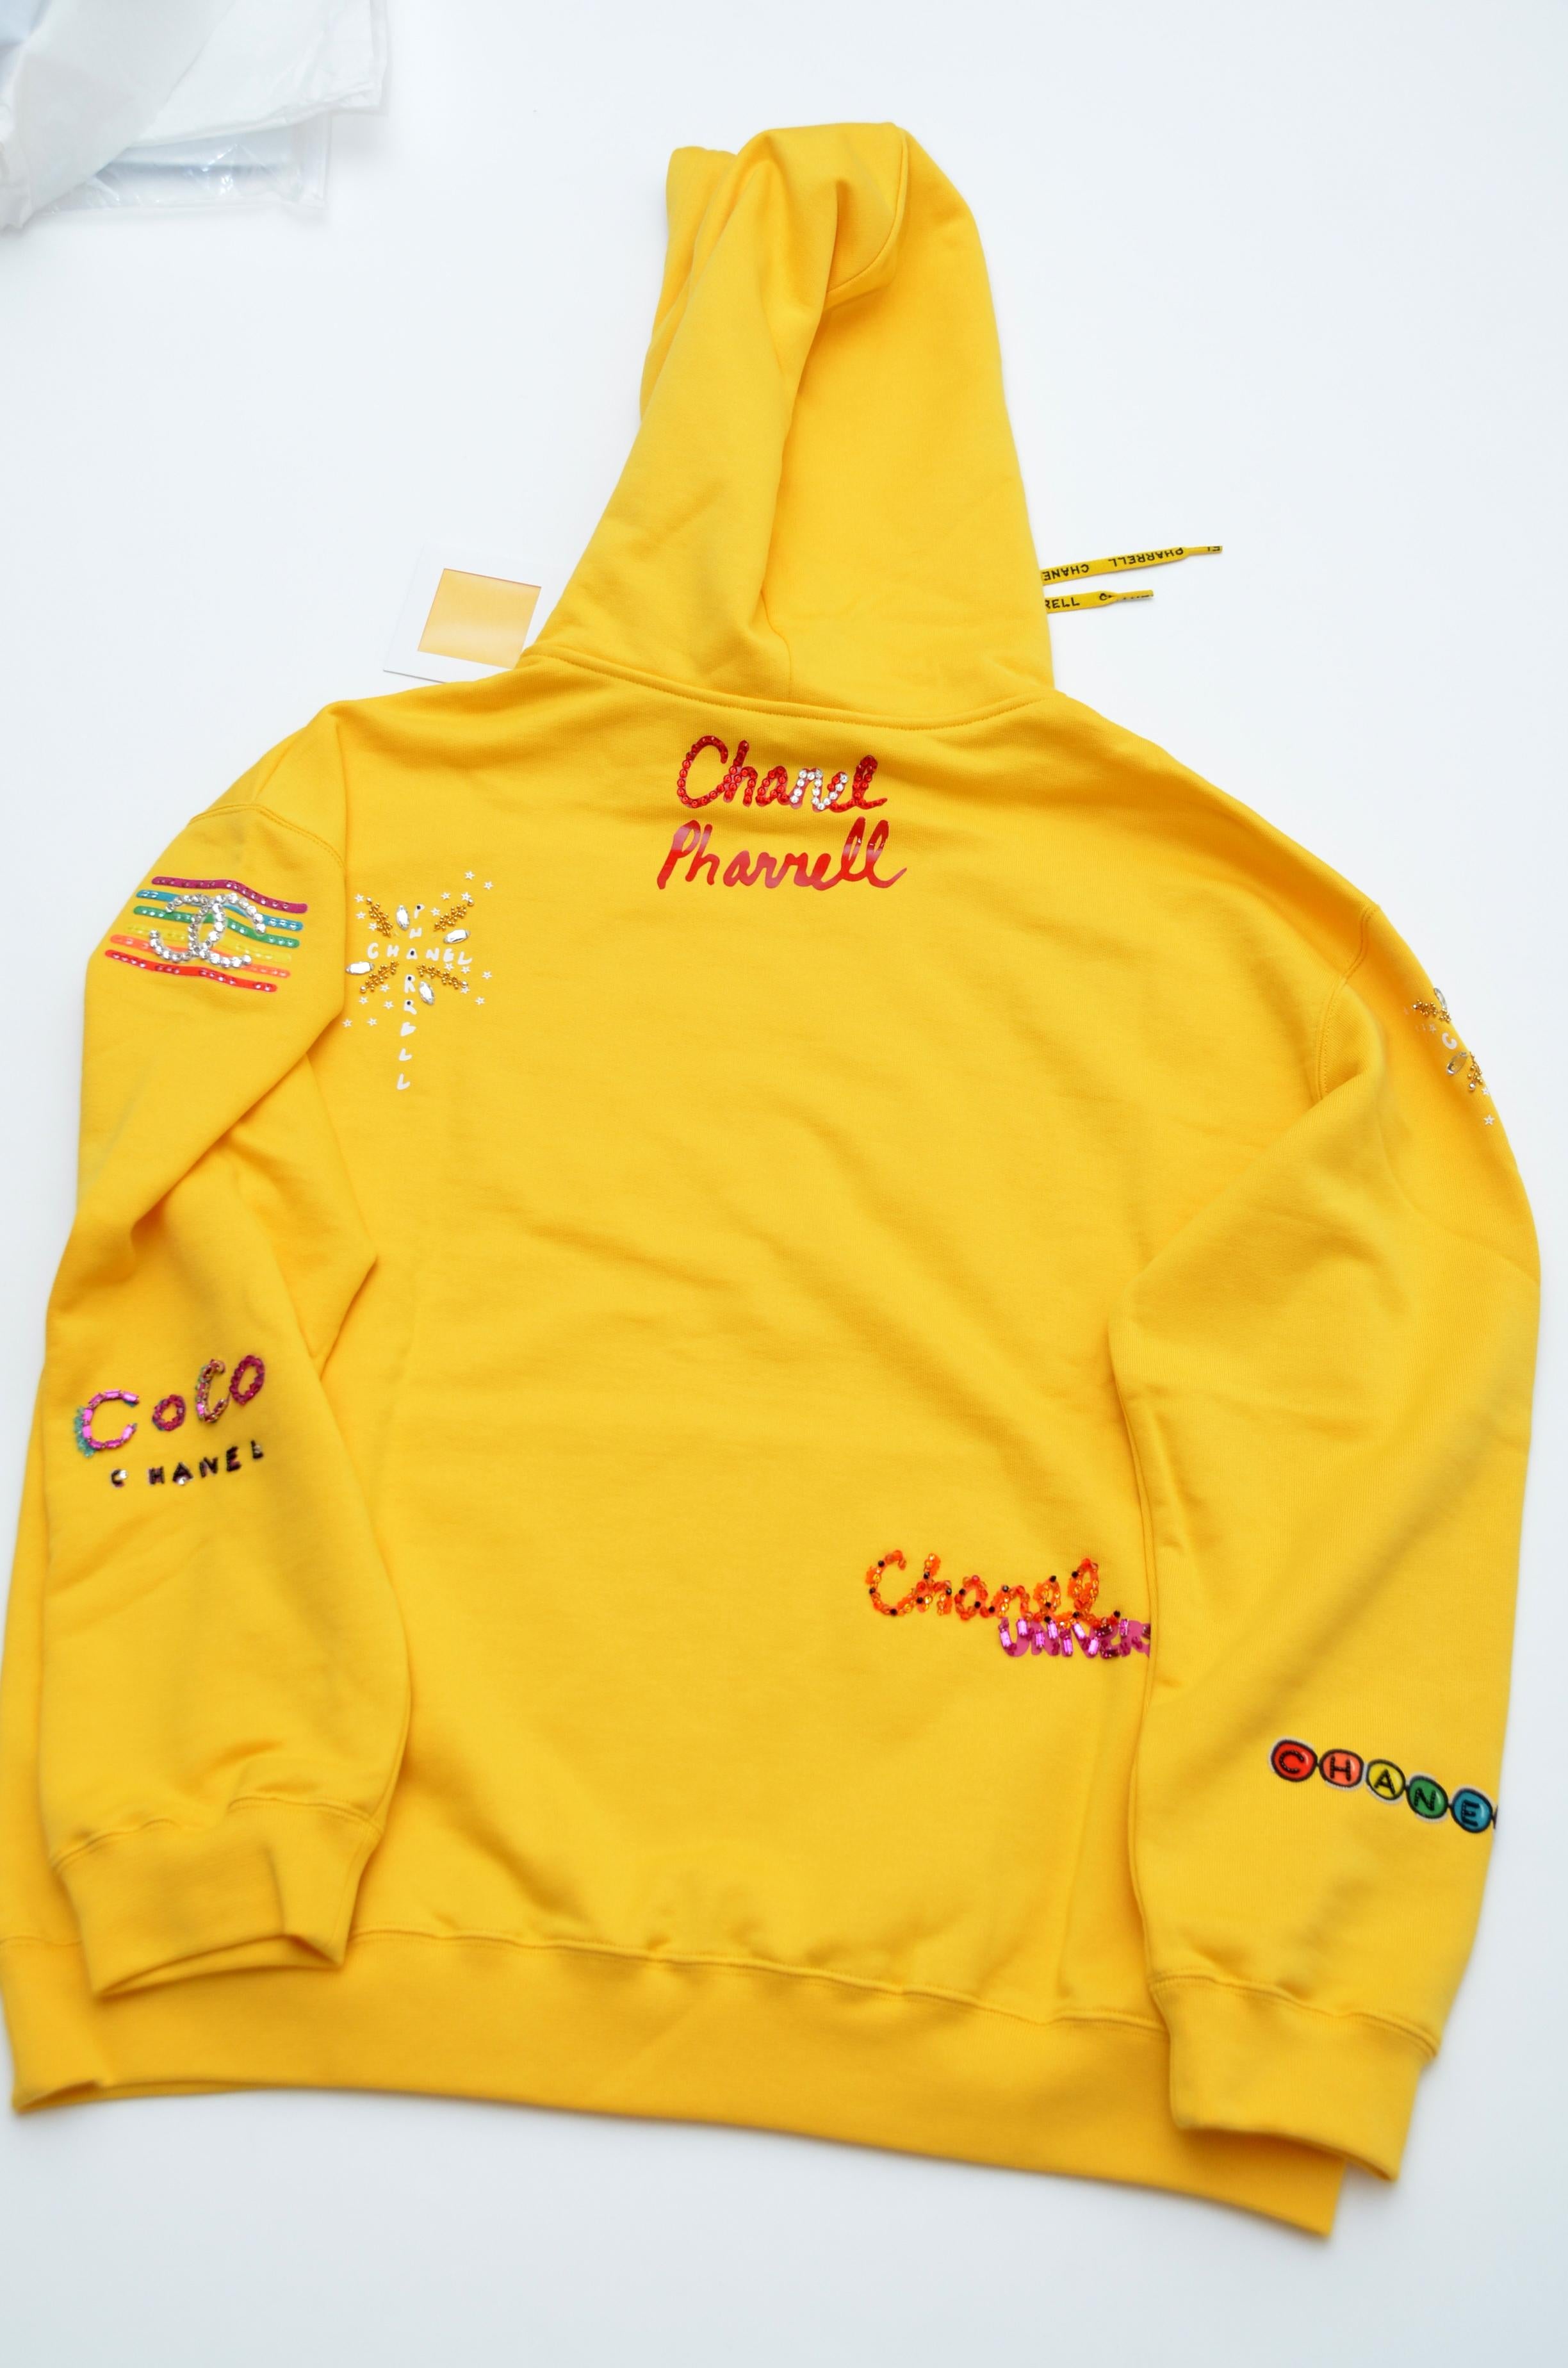  Chanel x Pharrell Capsule Collection Hoodie  Lesage Embroidery Yellow  L NEW 1